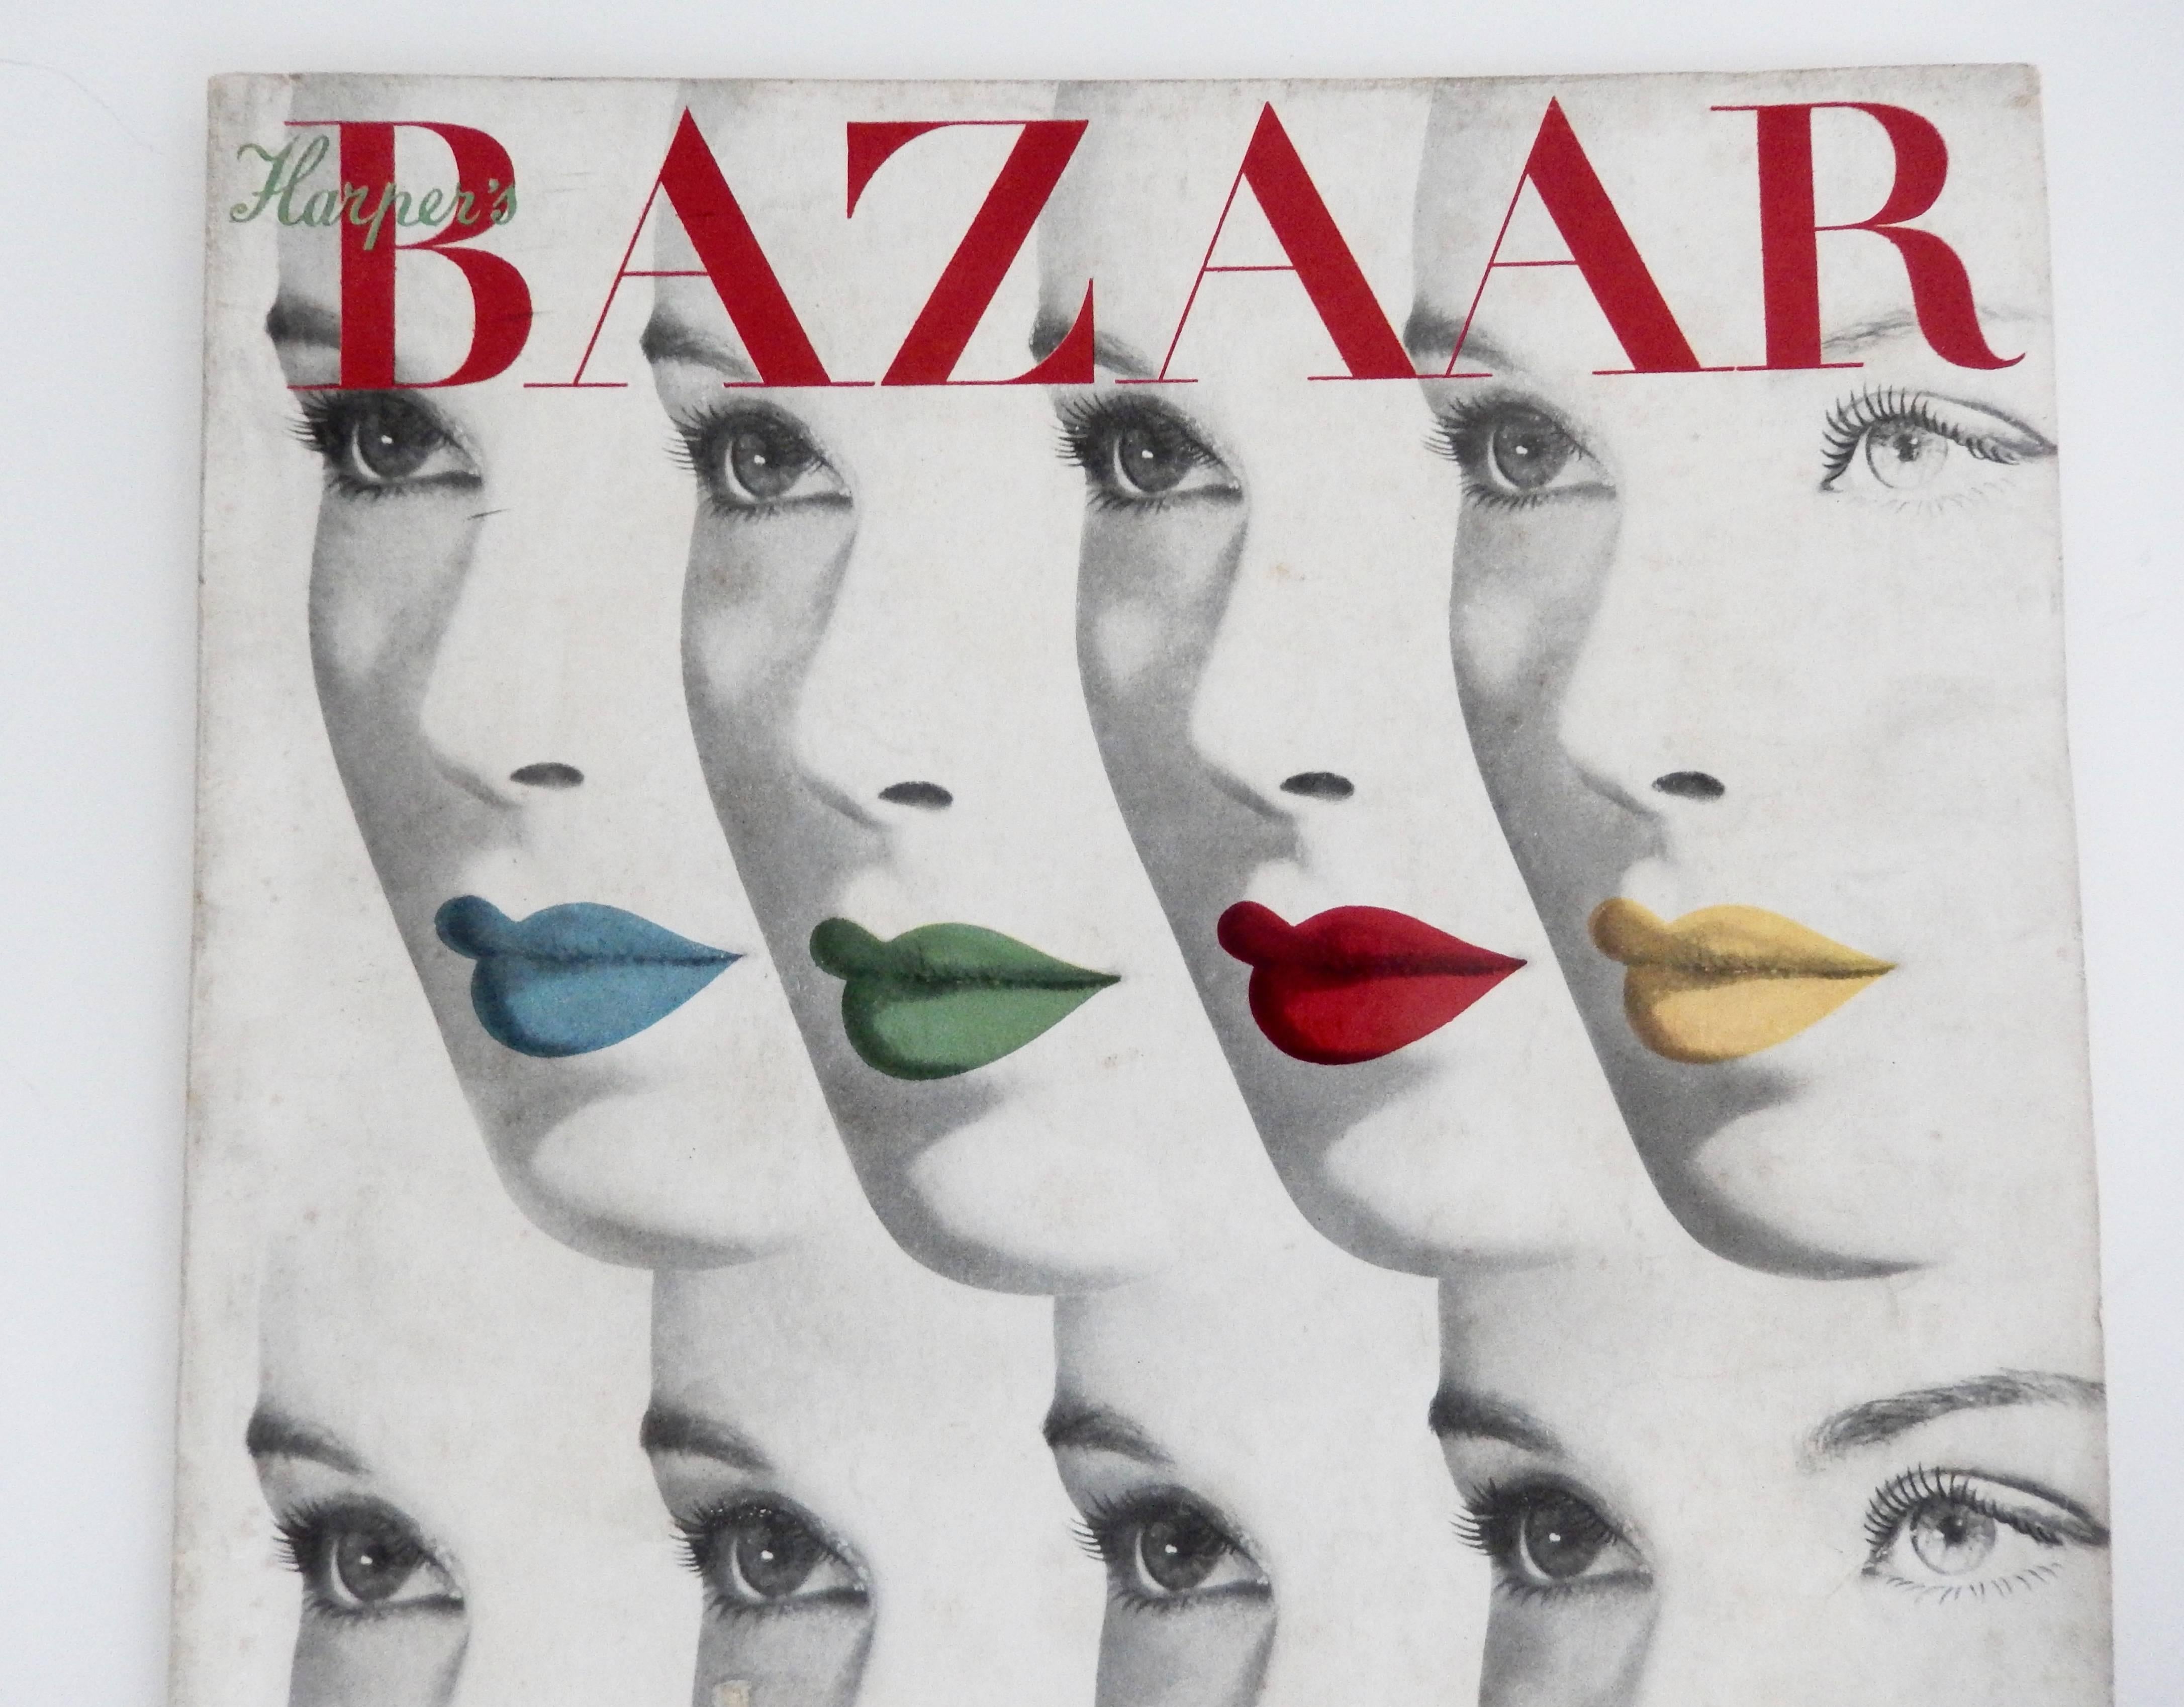 Herbert Bayer's iconic cover design of multiple faces for the August 1940 issue of Harper's Bazaar. This is the complete magazine. Scarce. An important addition to a collection of 20th century graphic design. Bayer's riveting illustration has